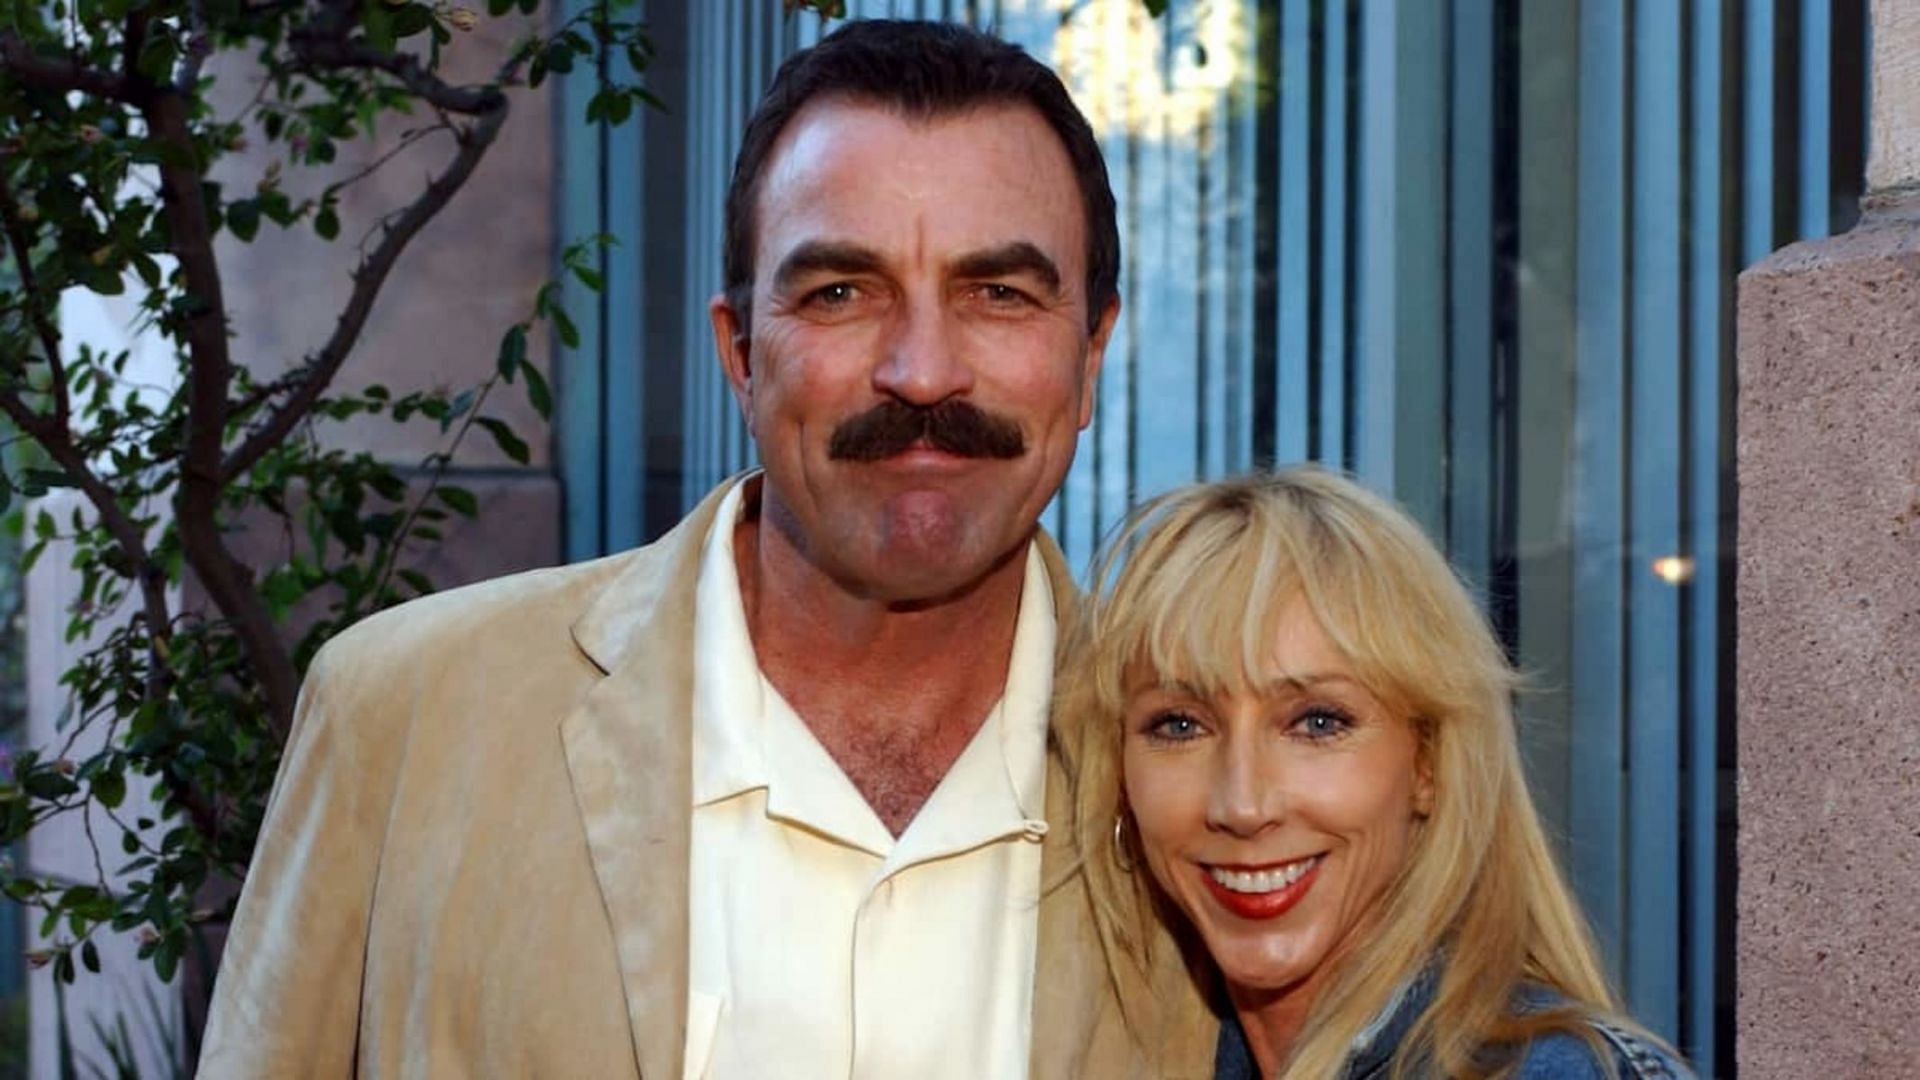 Tom Selleck and his wife Jillie Mack (Image via Arun Nevader/WireImage/Getty Images)